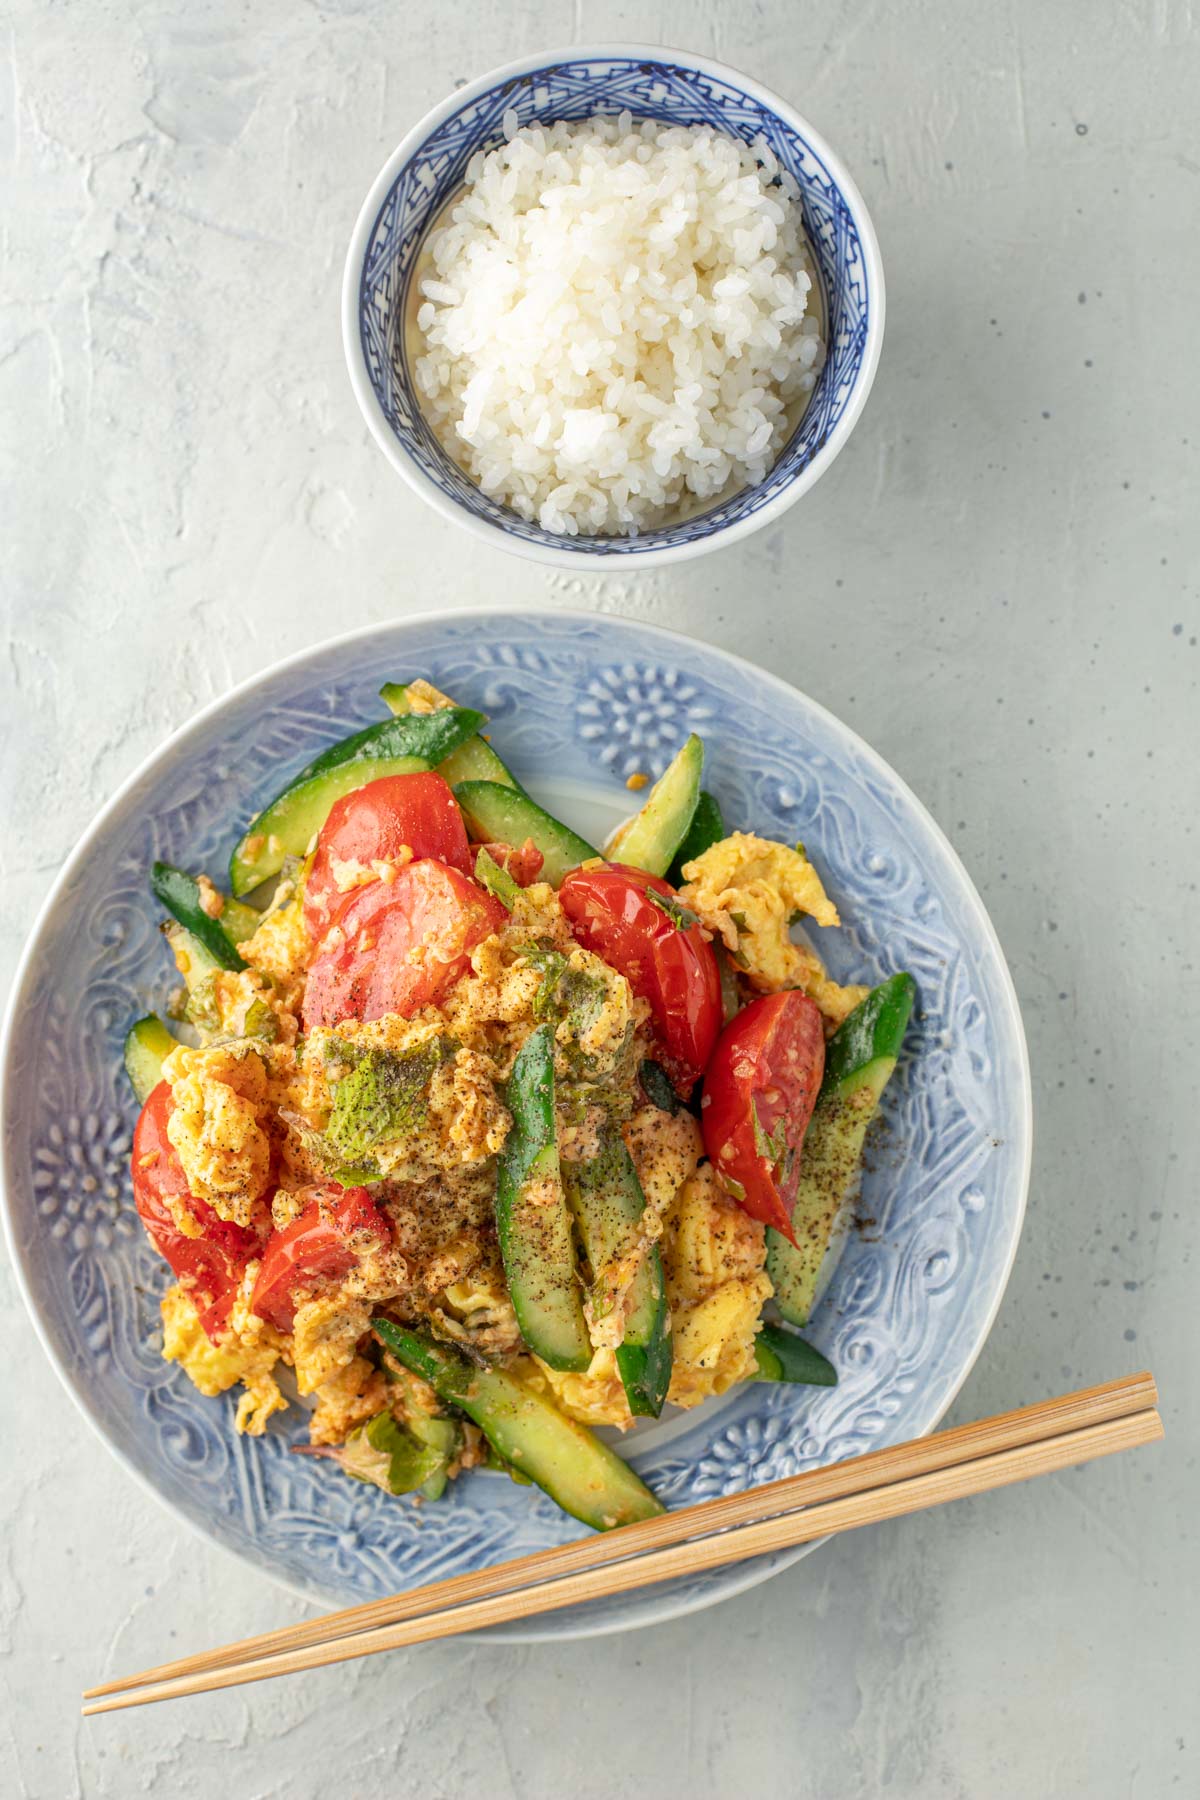 tomato egg stir fry and stemed rice